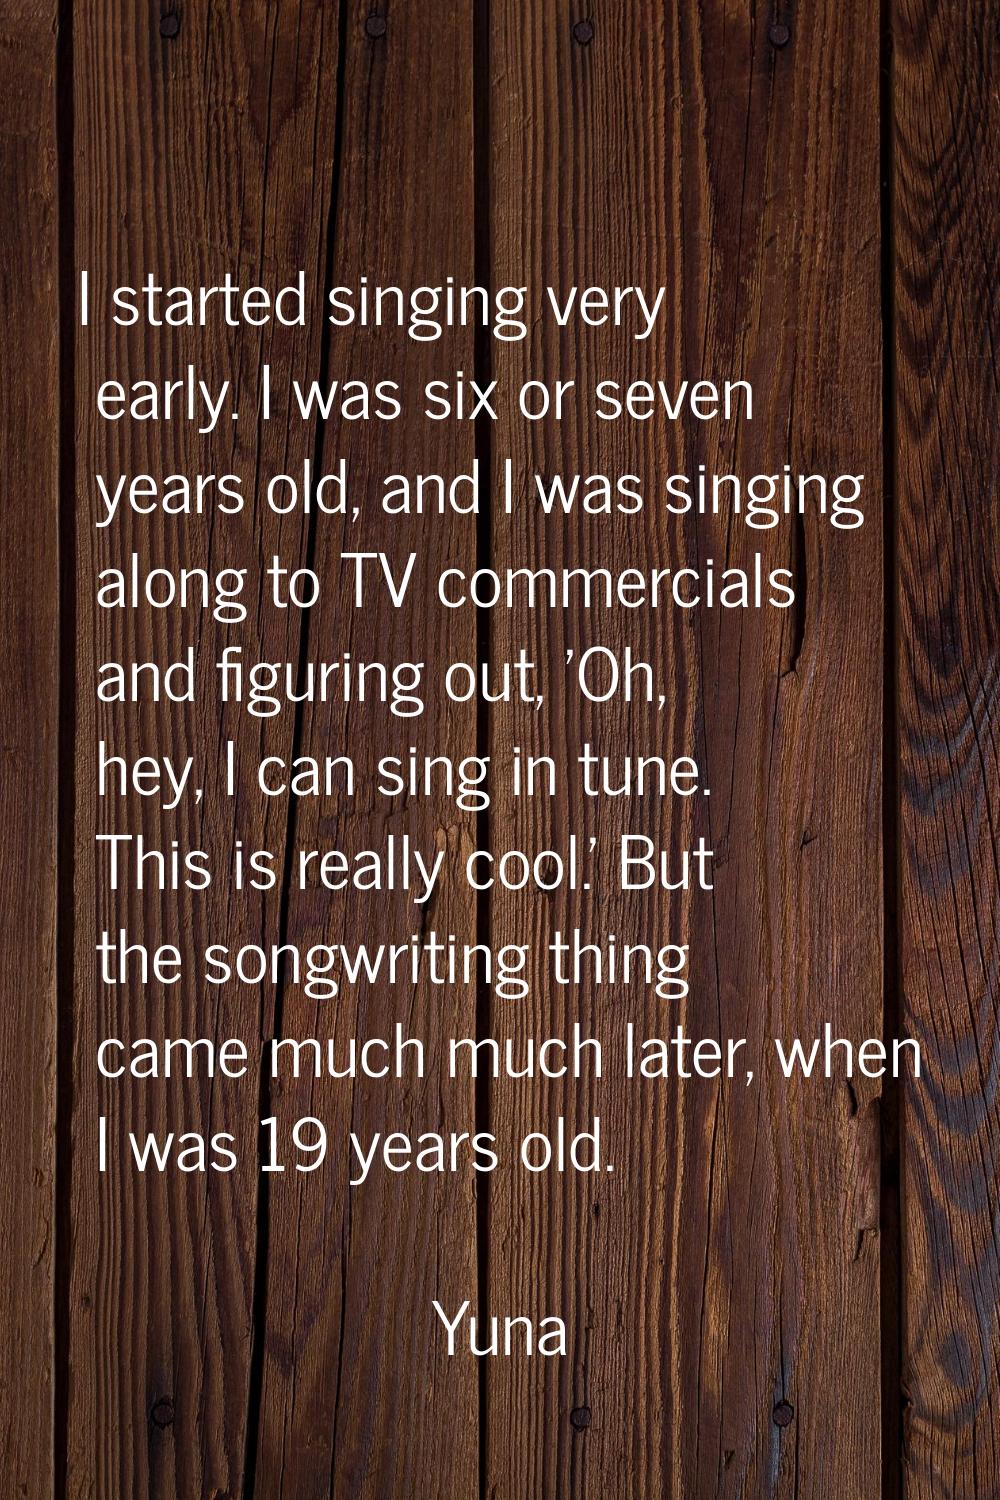 I started singing very early. I was six or seven years old, and I was singing along to TV commercia